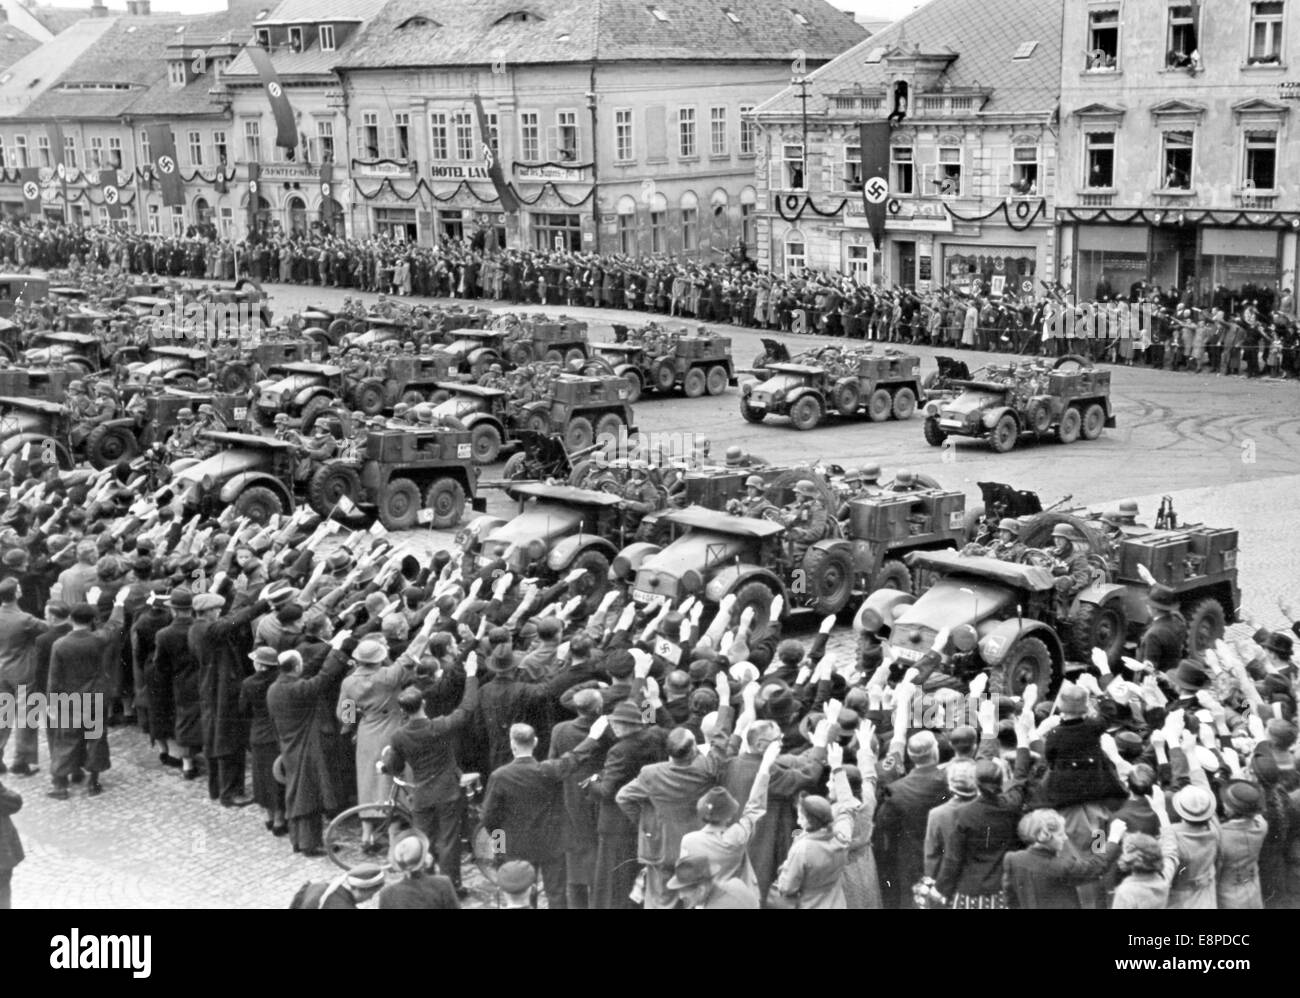 The picture from a Nazi news report shows the reception of the German Wehrmacht in Schluckenau, Sudetenland (today Sluknov, Czech Republic), October 1938. The Nazi news report written on the back of the picture reads: 'The first pictures of the arrival of German troops in the Sudentenland (2nd division). On market square in festively decorated Schluckenau, motorized groups have arrived to the delightment of the residents.' Fotoarchiv für Zeitgeschichtee - NO WIRE SERVICE Stock Photo